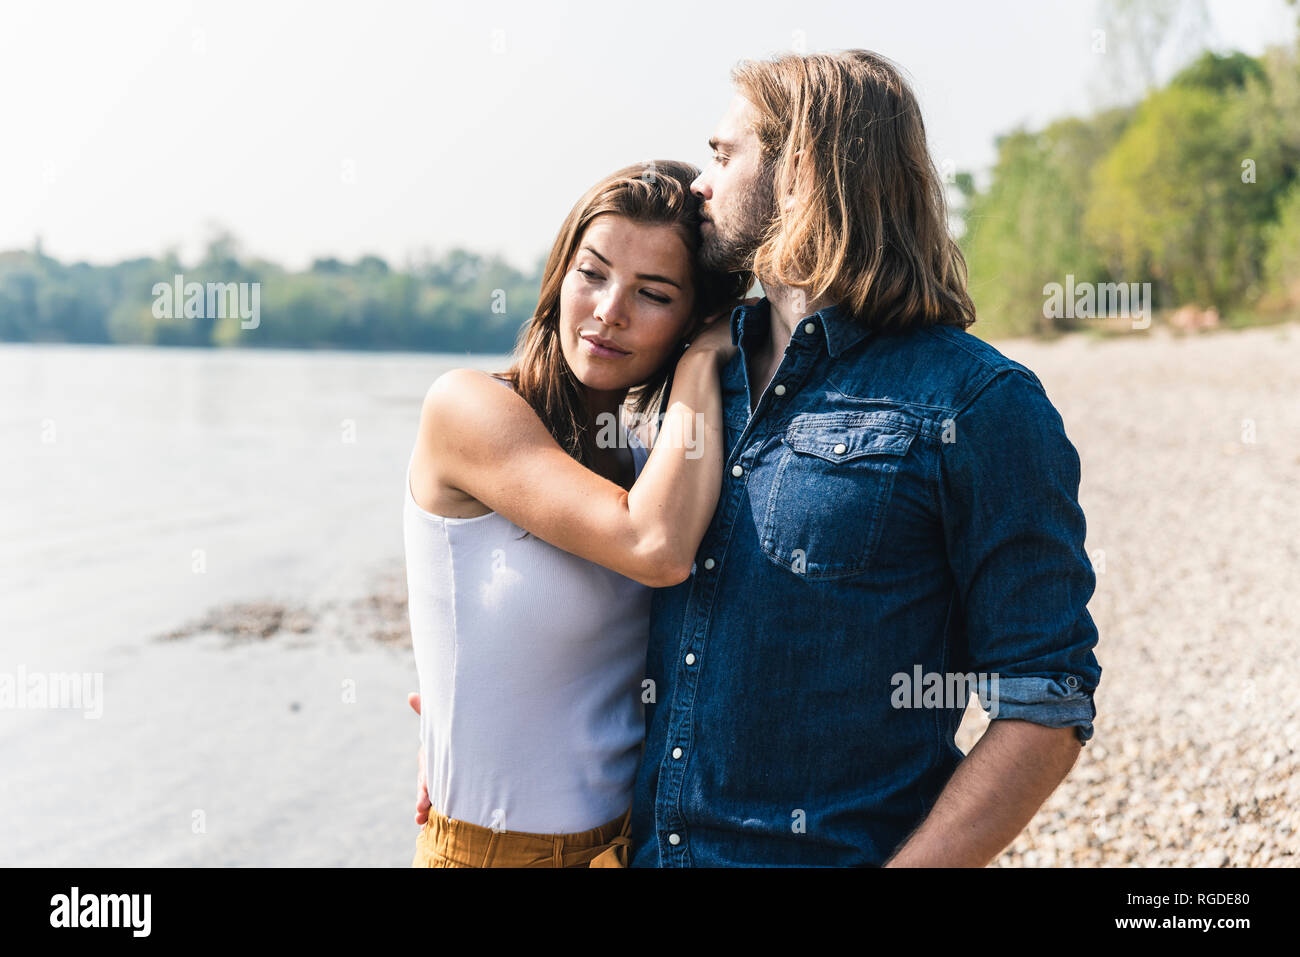 Young couple in love at the riverside Stock Photo